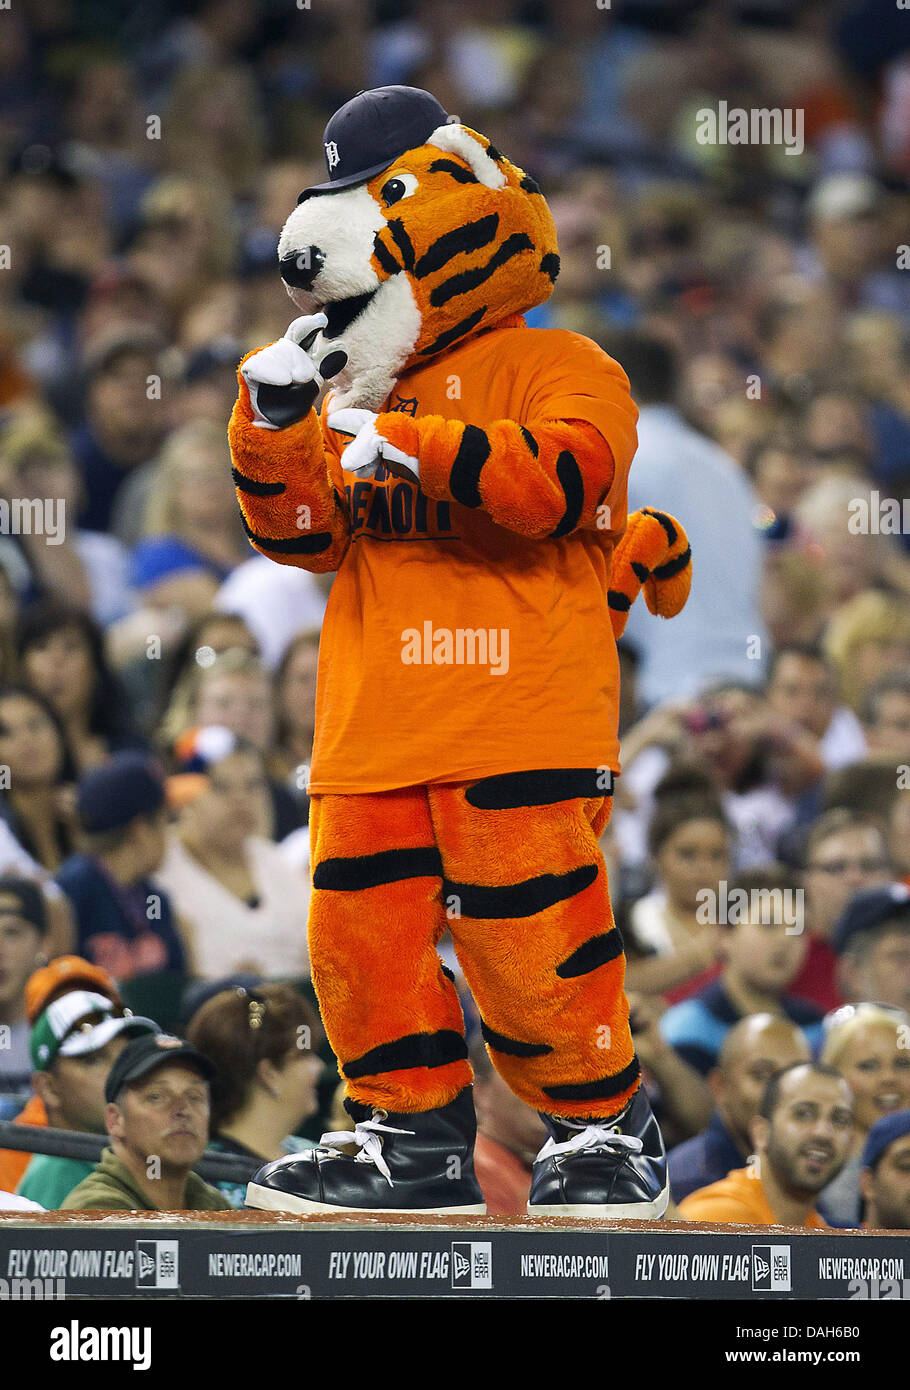 July 10, 2013 - Detroit, Michigan, United States of America - July 10, 2013: Detroit Tigers mascot Paws performs during MLB game action between the Chicago White Sox and the Detroit Tigers at Comerica Park in Detroit, Michigan. The Tigers defeated the White Sox 8-5. Stock Photo